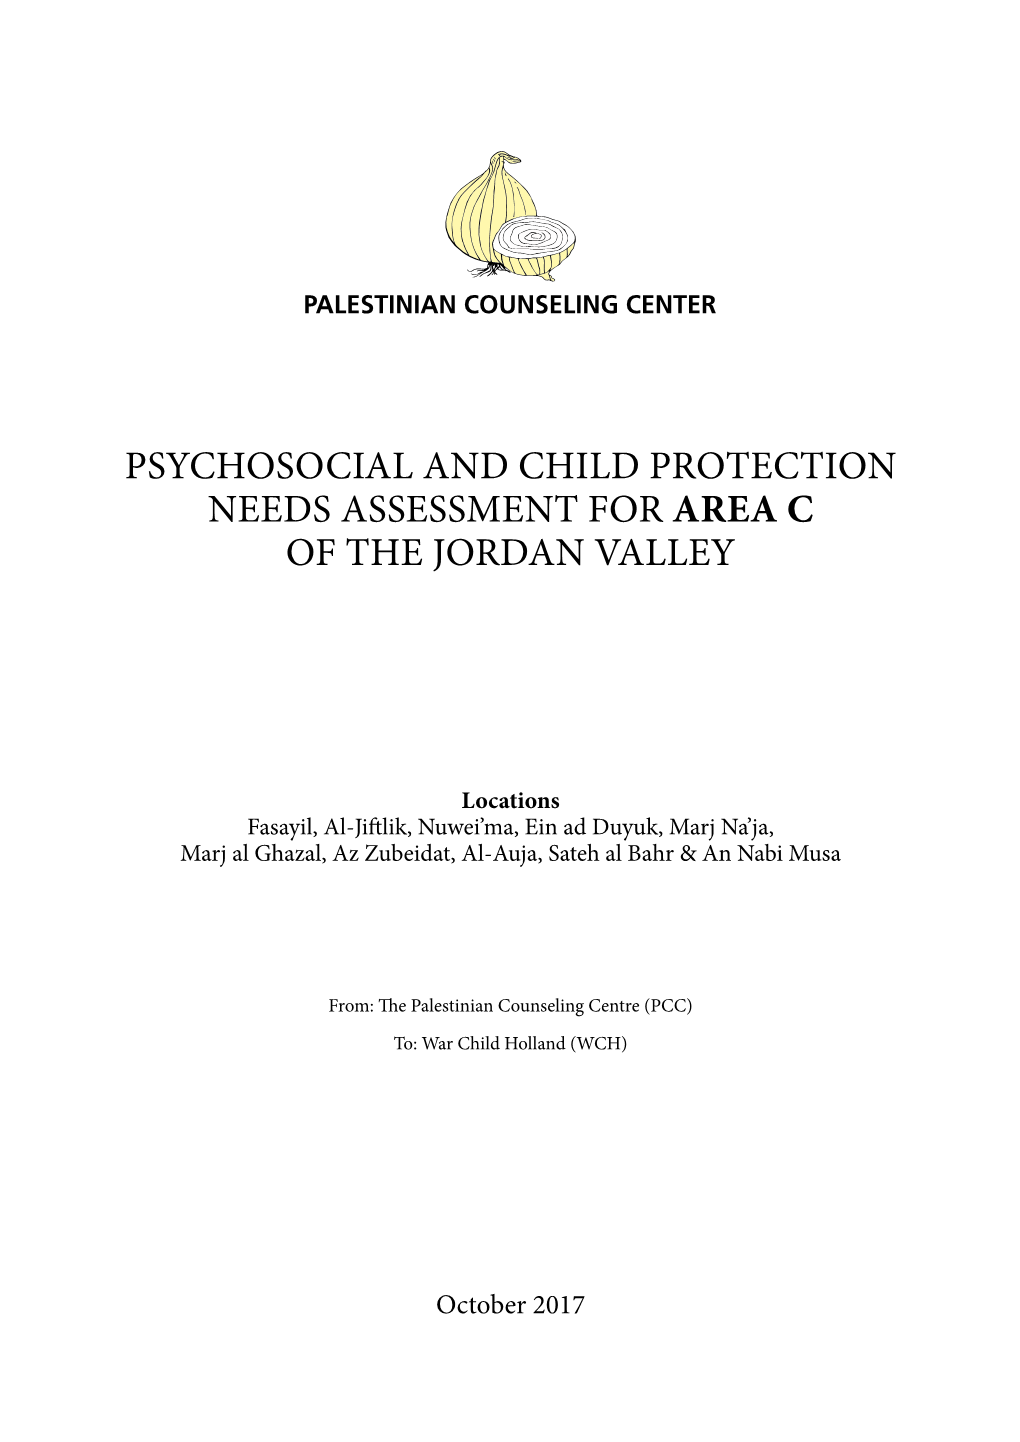 Psychosocial and Child Protection Needs Assessment for Area C of the Jordan Valley